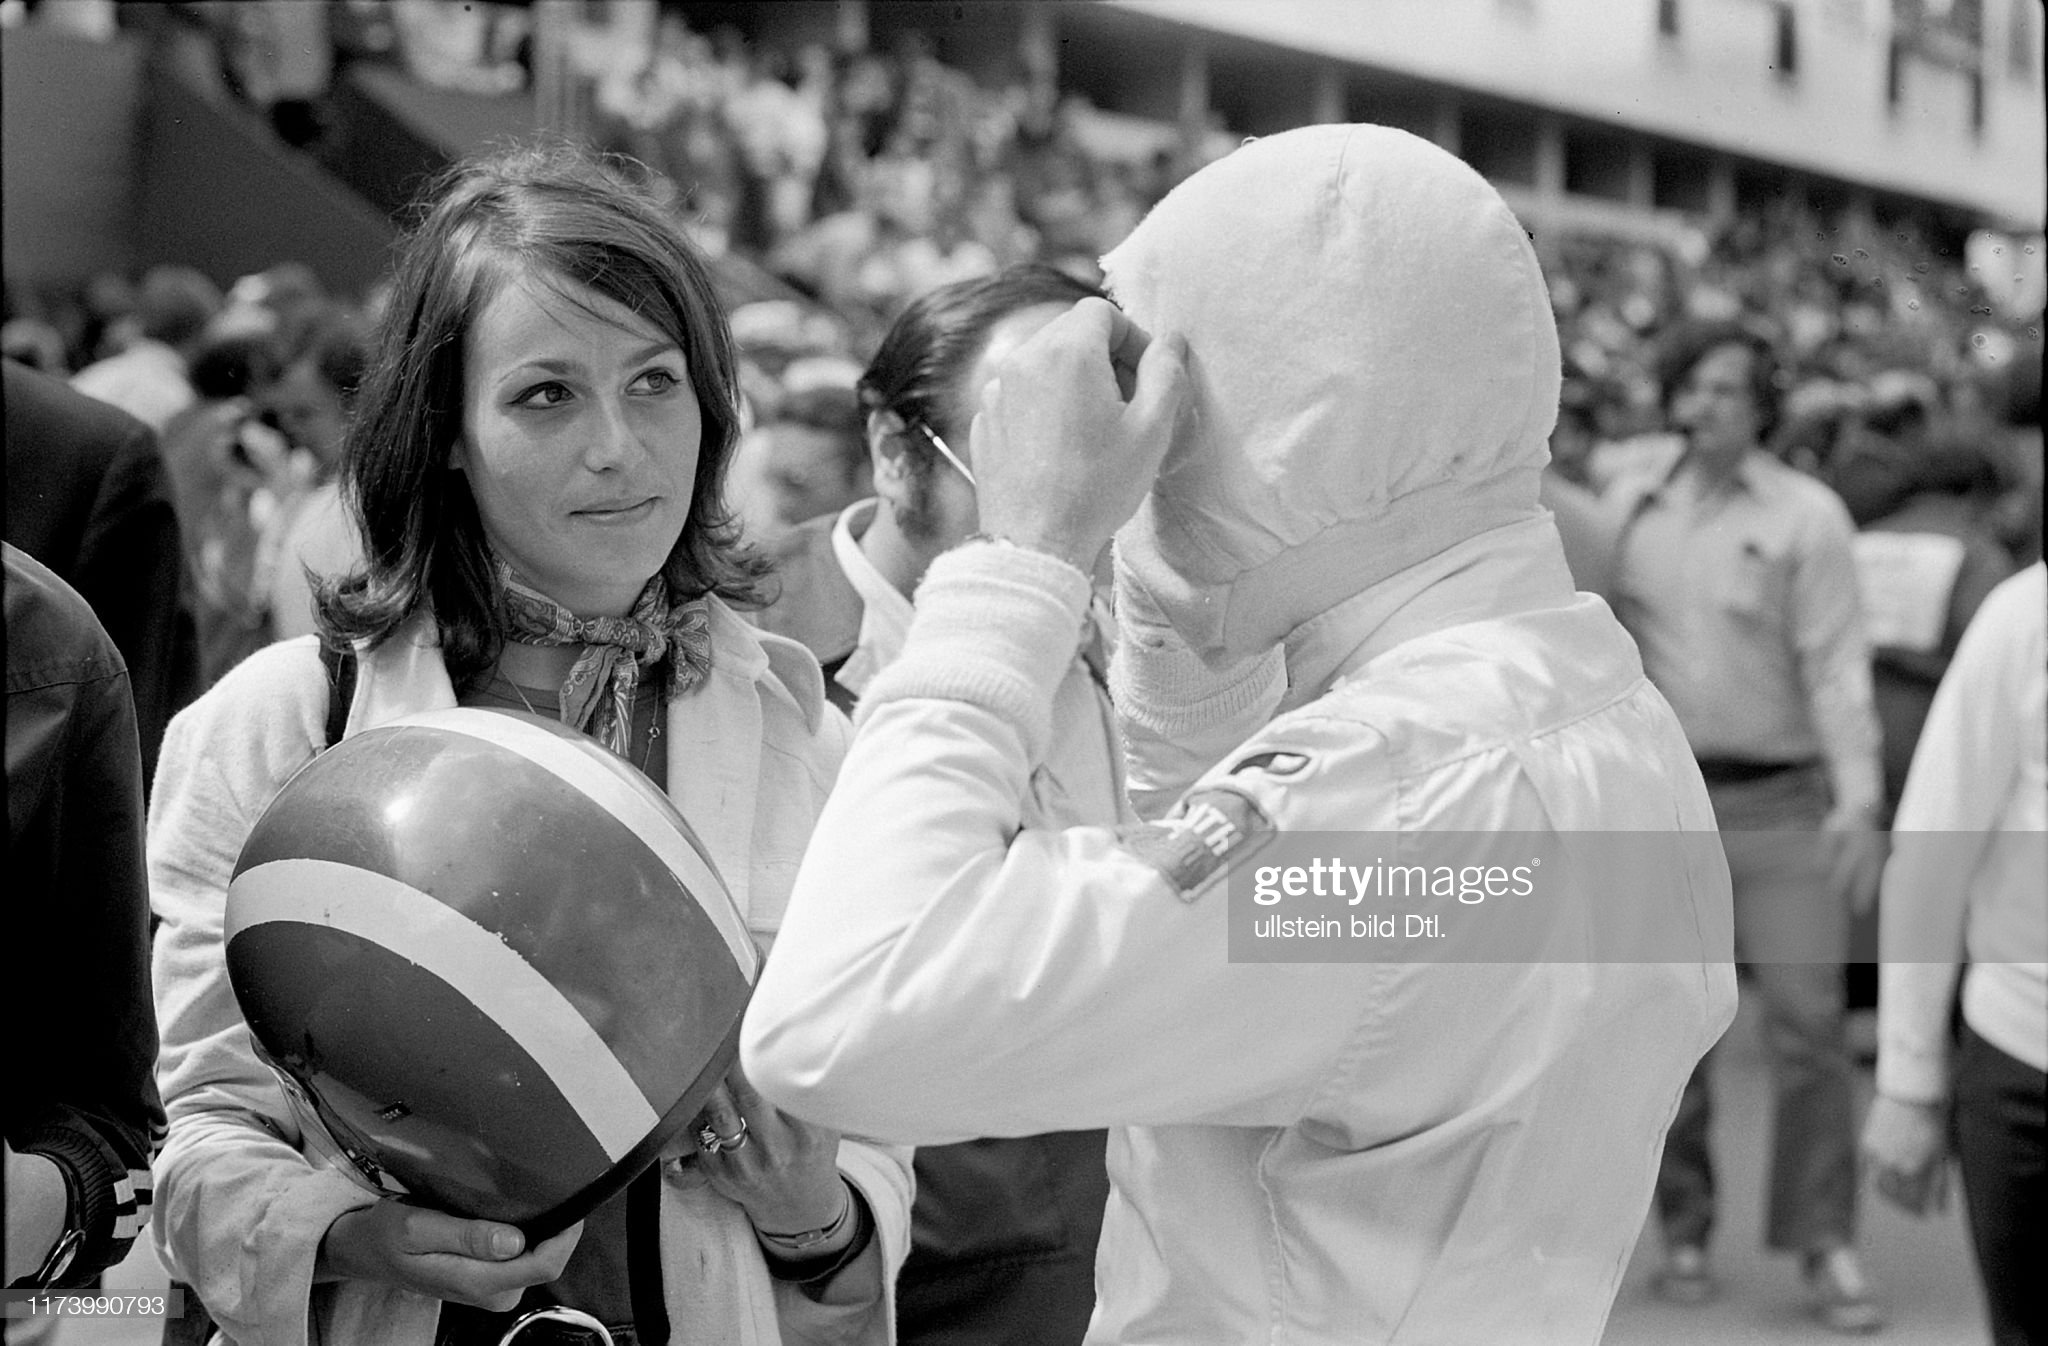 Joe Siffert with a girl just before the starting of the 1971 Monaco GP. 